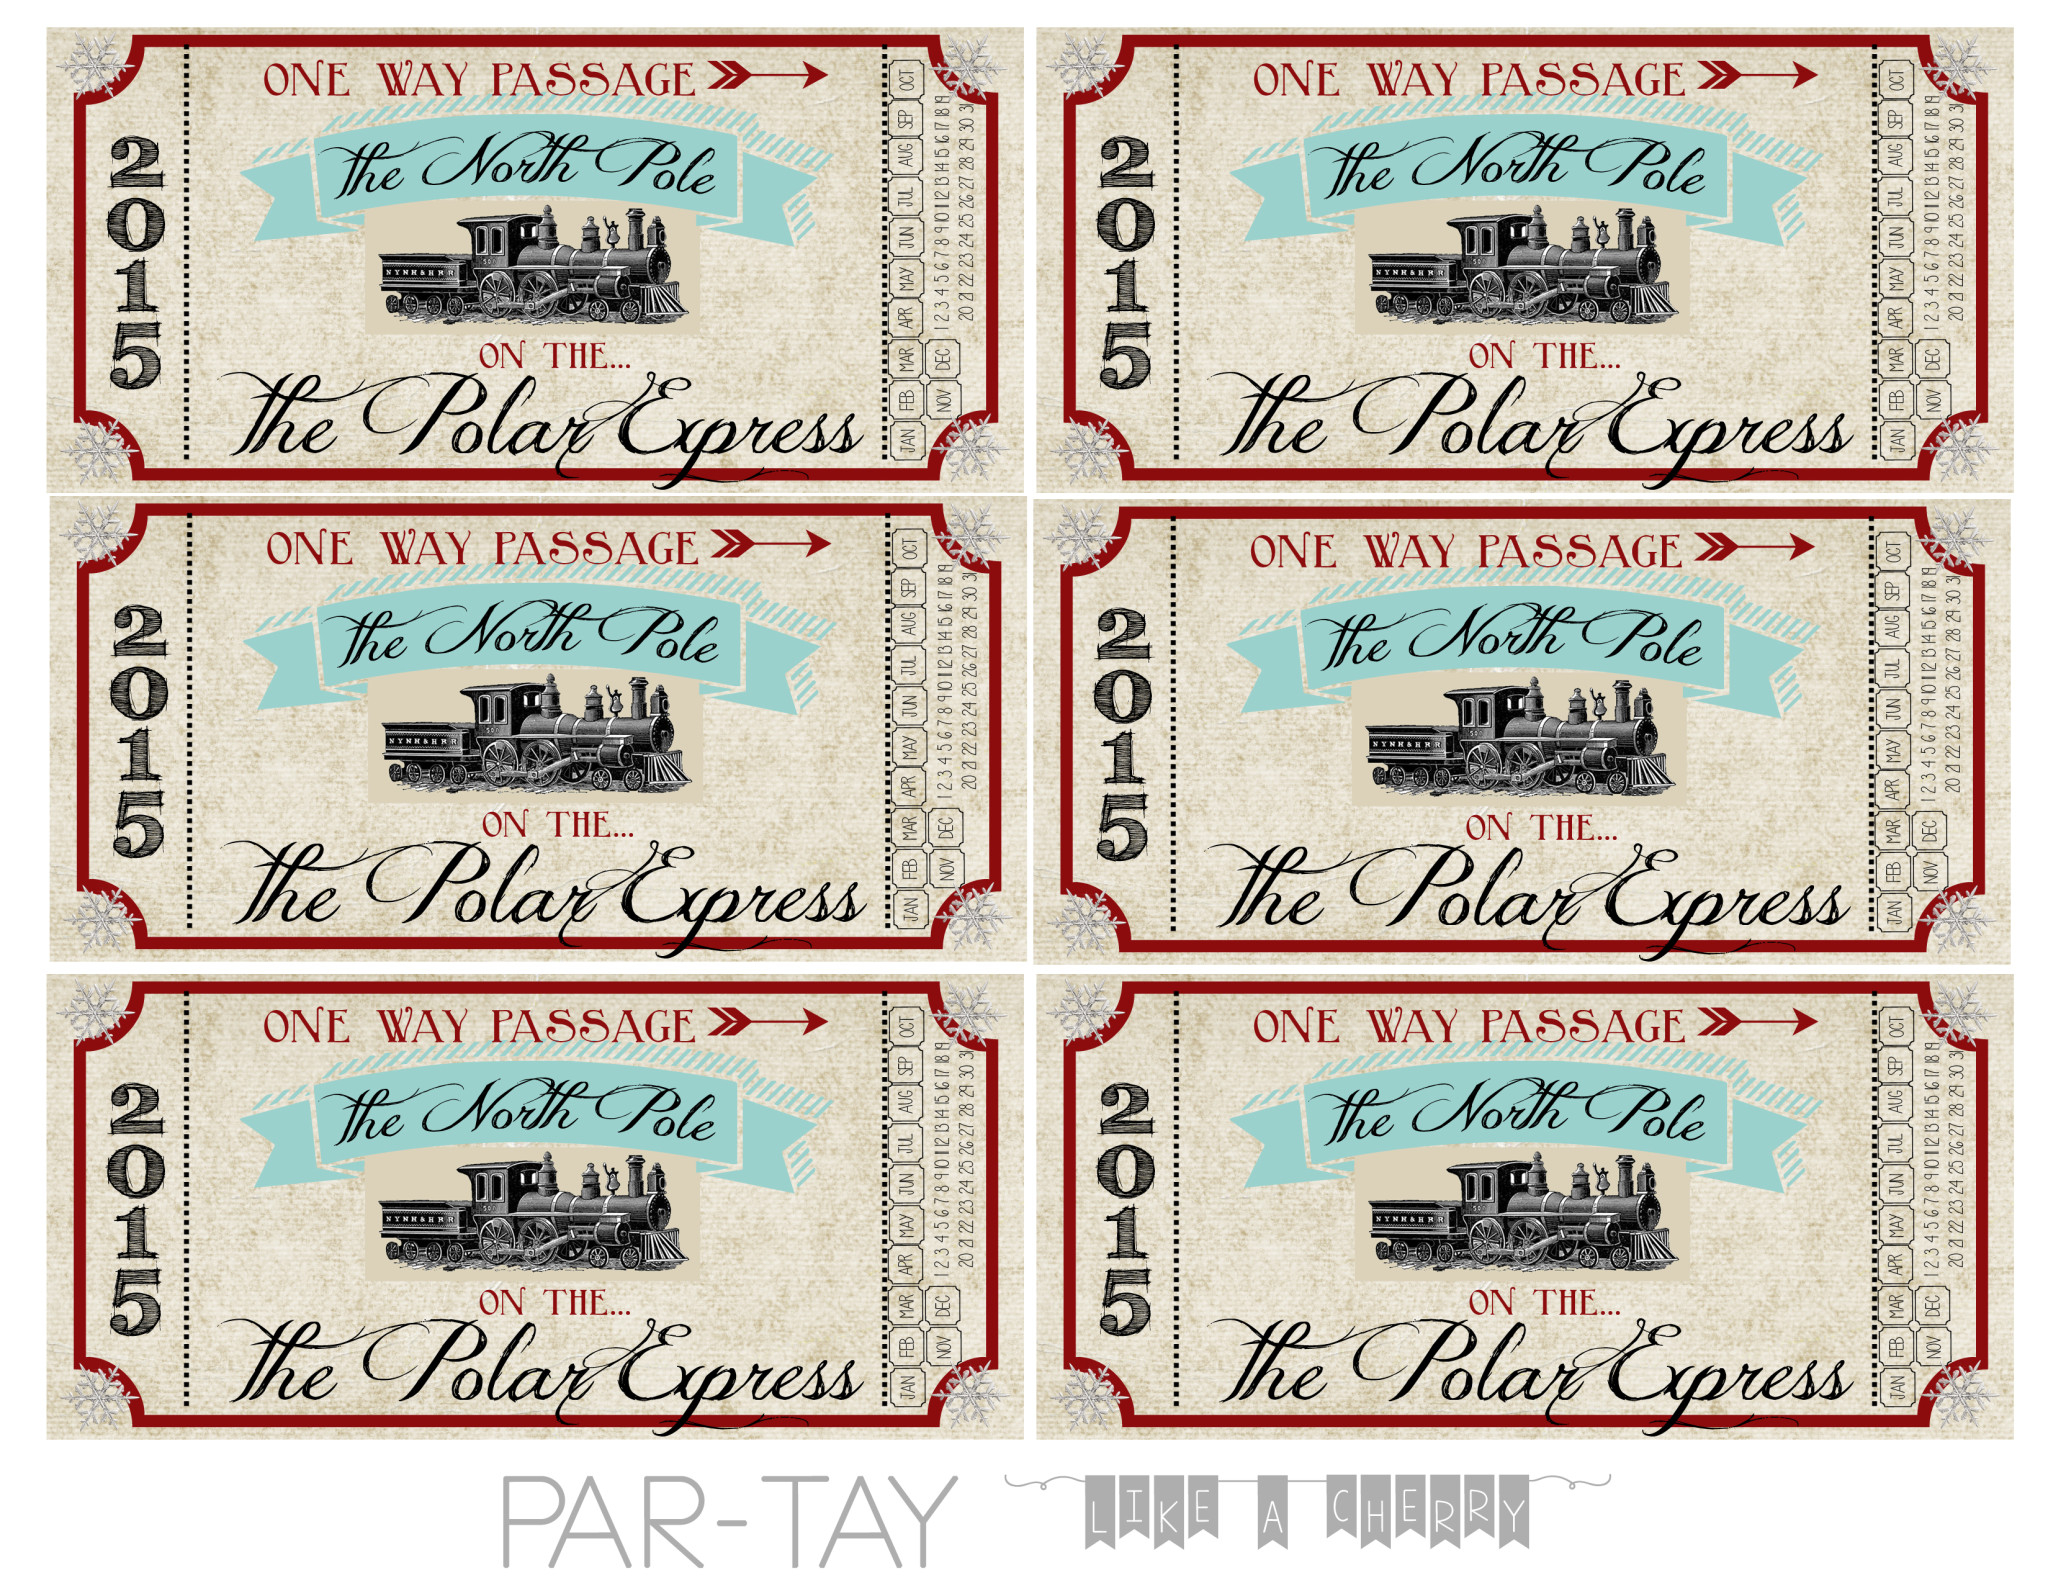 Polar Express Train Tickets Free Printable Party Like A Cherry intended for proportions 2048 X 1583